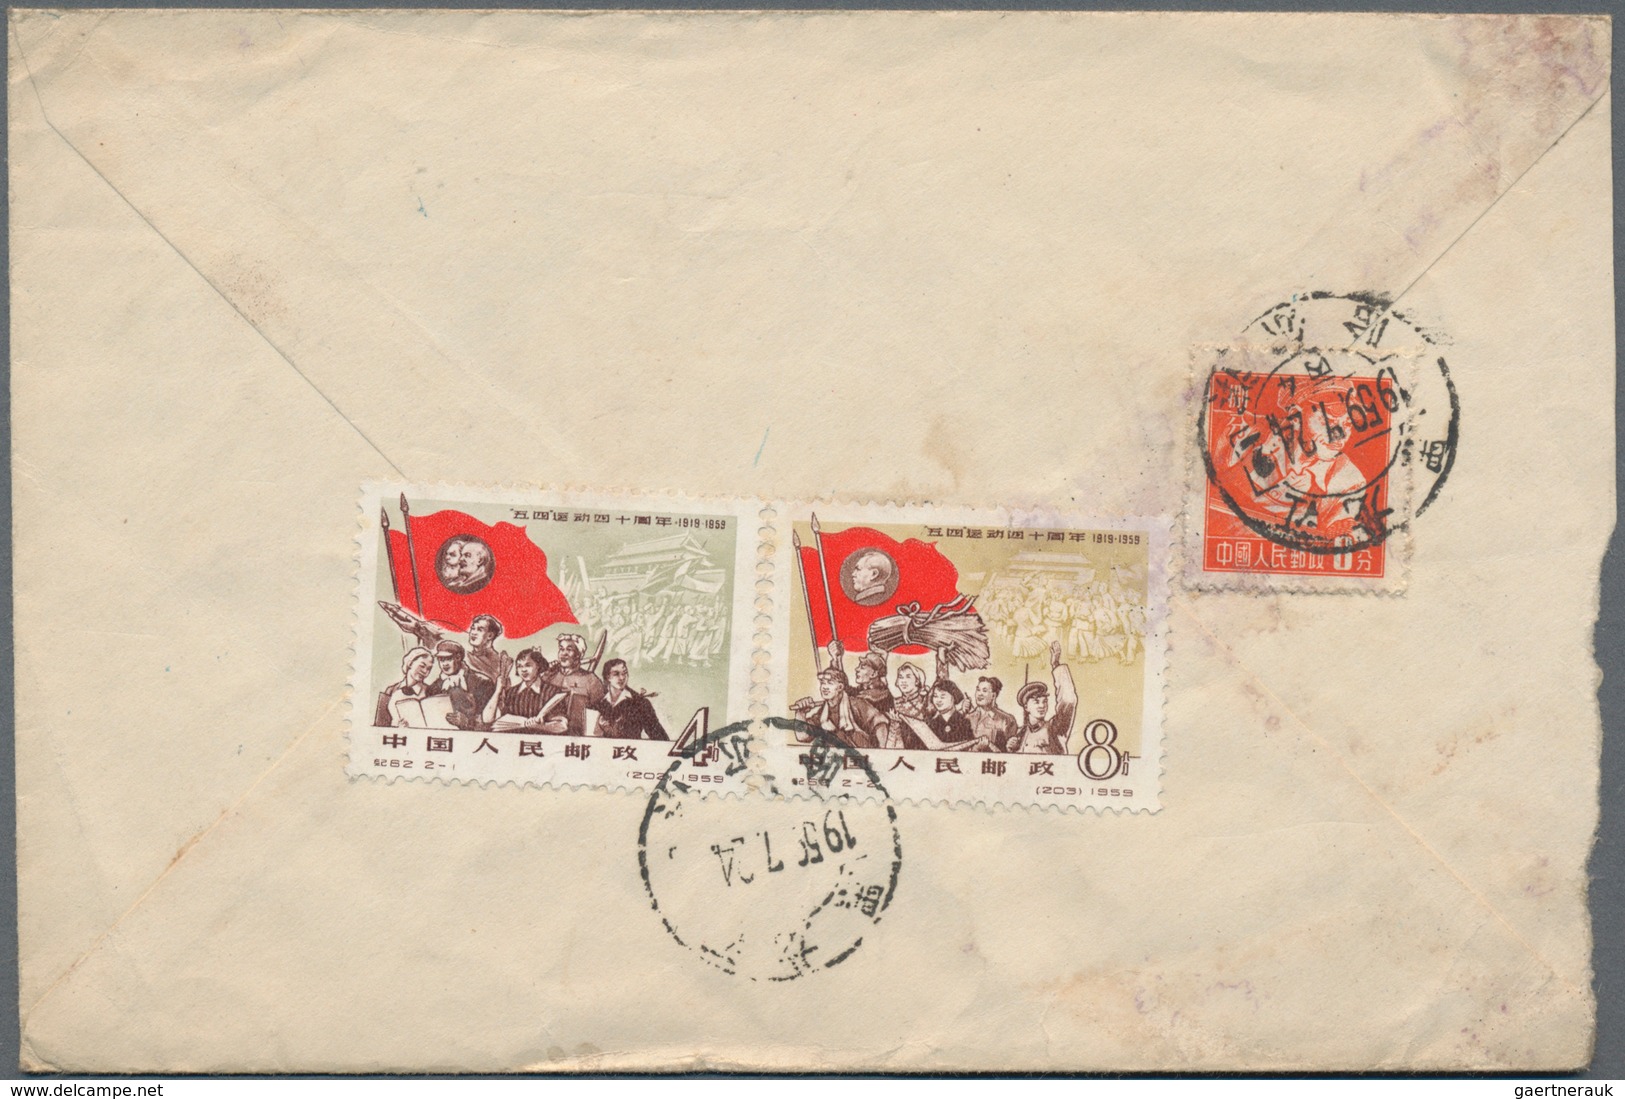 China - Volksrepublik - Ganzsachen: 1955/62 (ca.), 15 covers with commemoratives mostly to Germany o